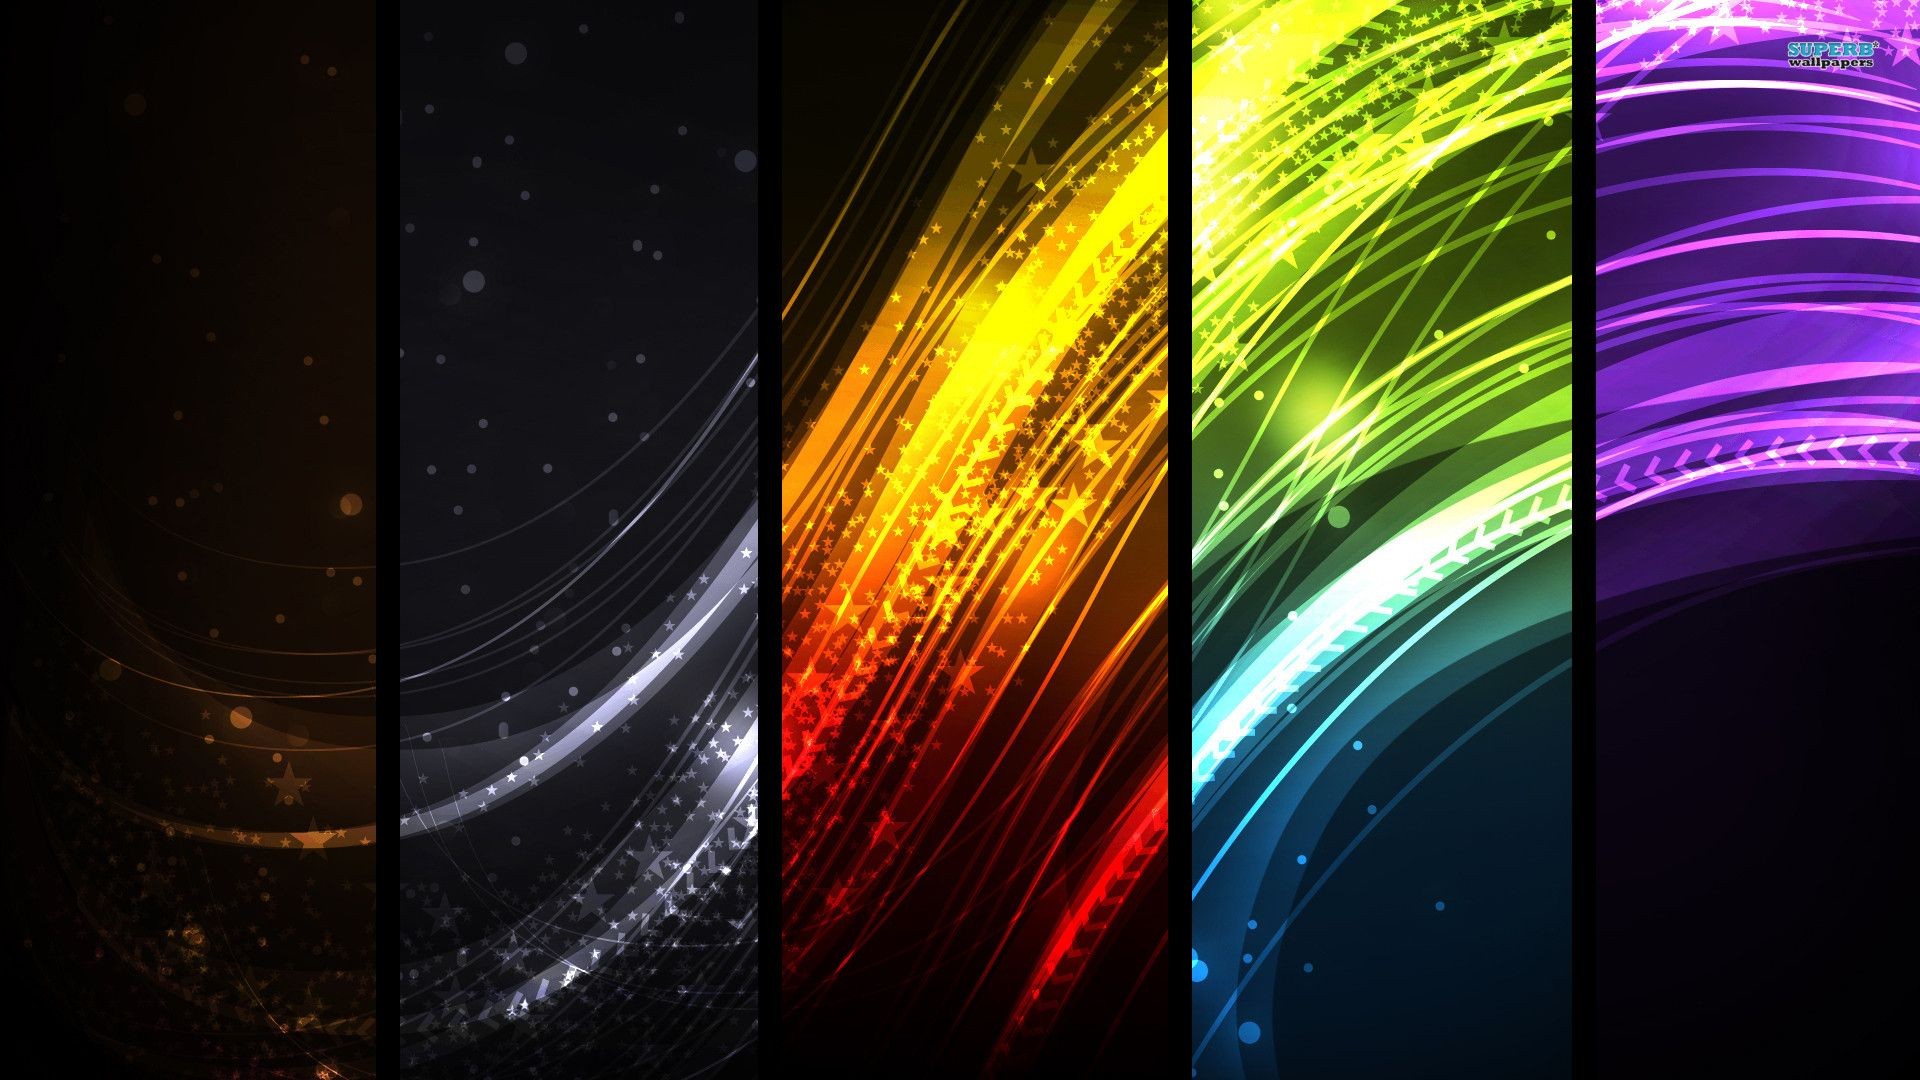 Abstract wallpaper 1920x1080 ·① Download free cool full HD ...